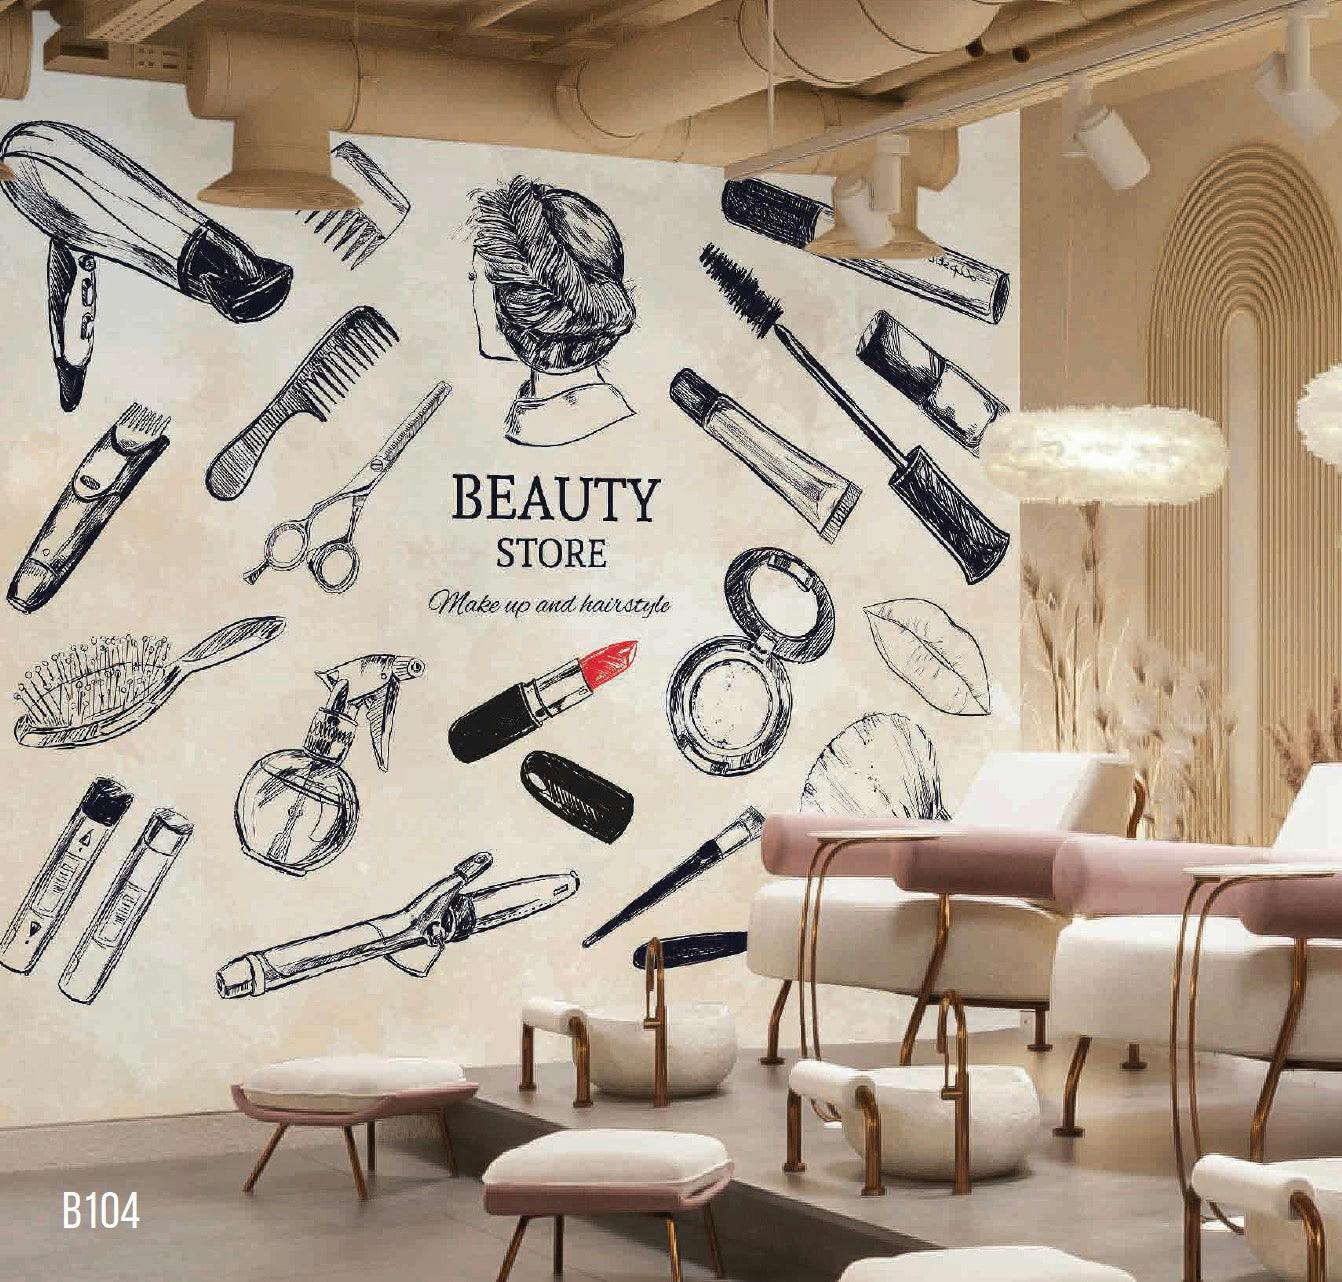 Enhance Your Salon's Ambiance with our High-Quality Hairdressing Equipment Mural